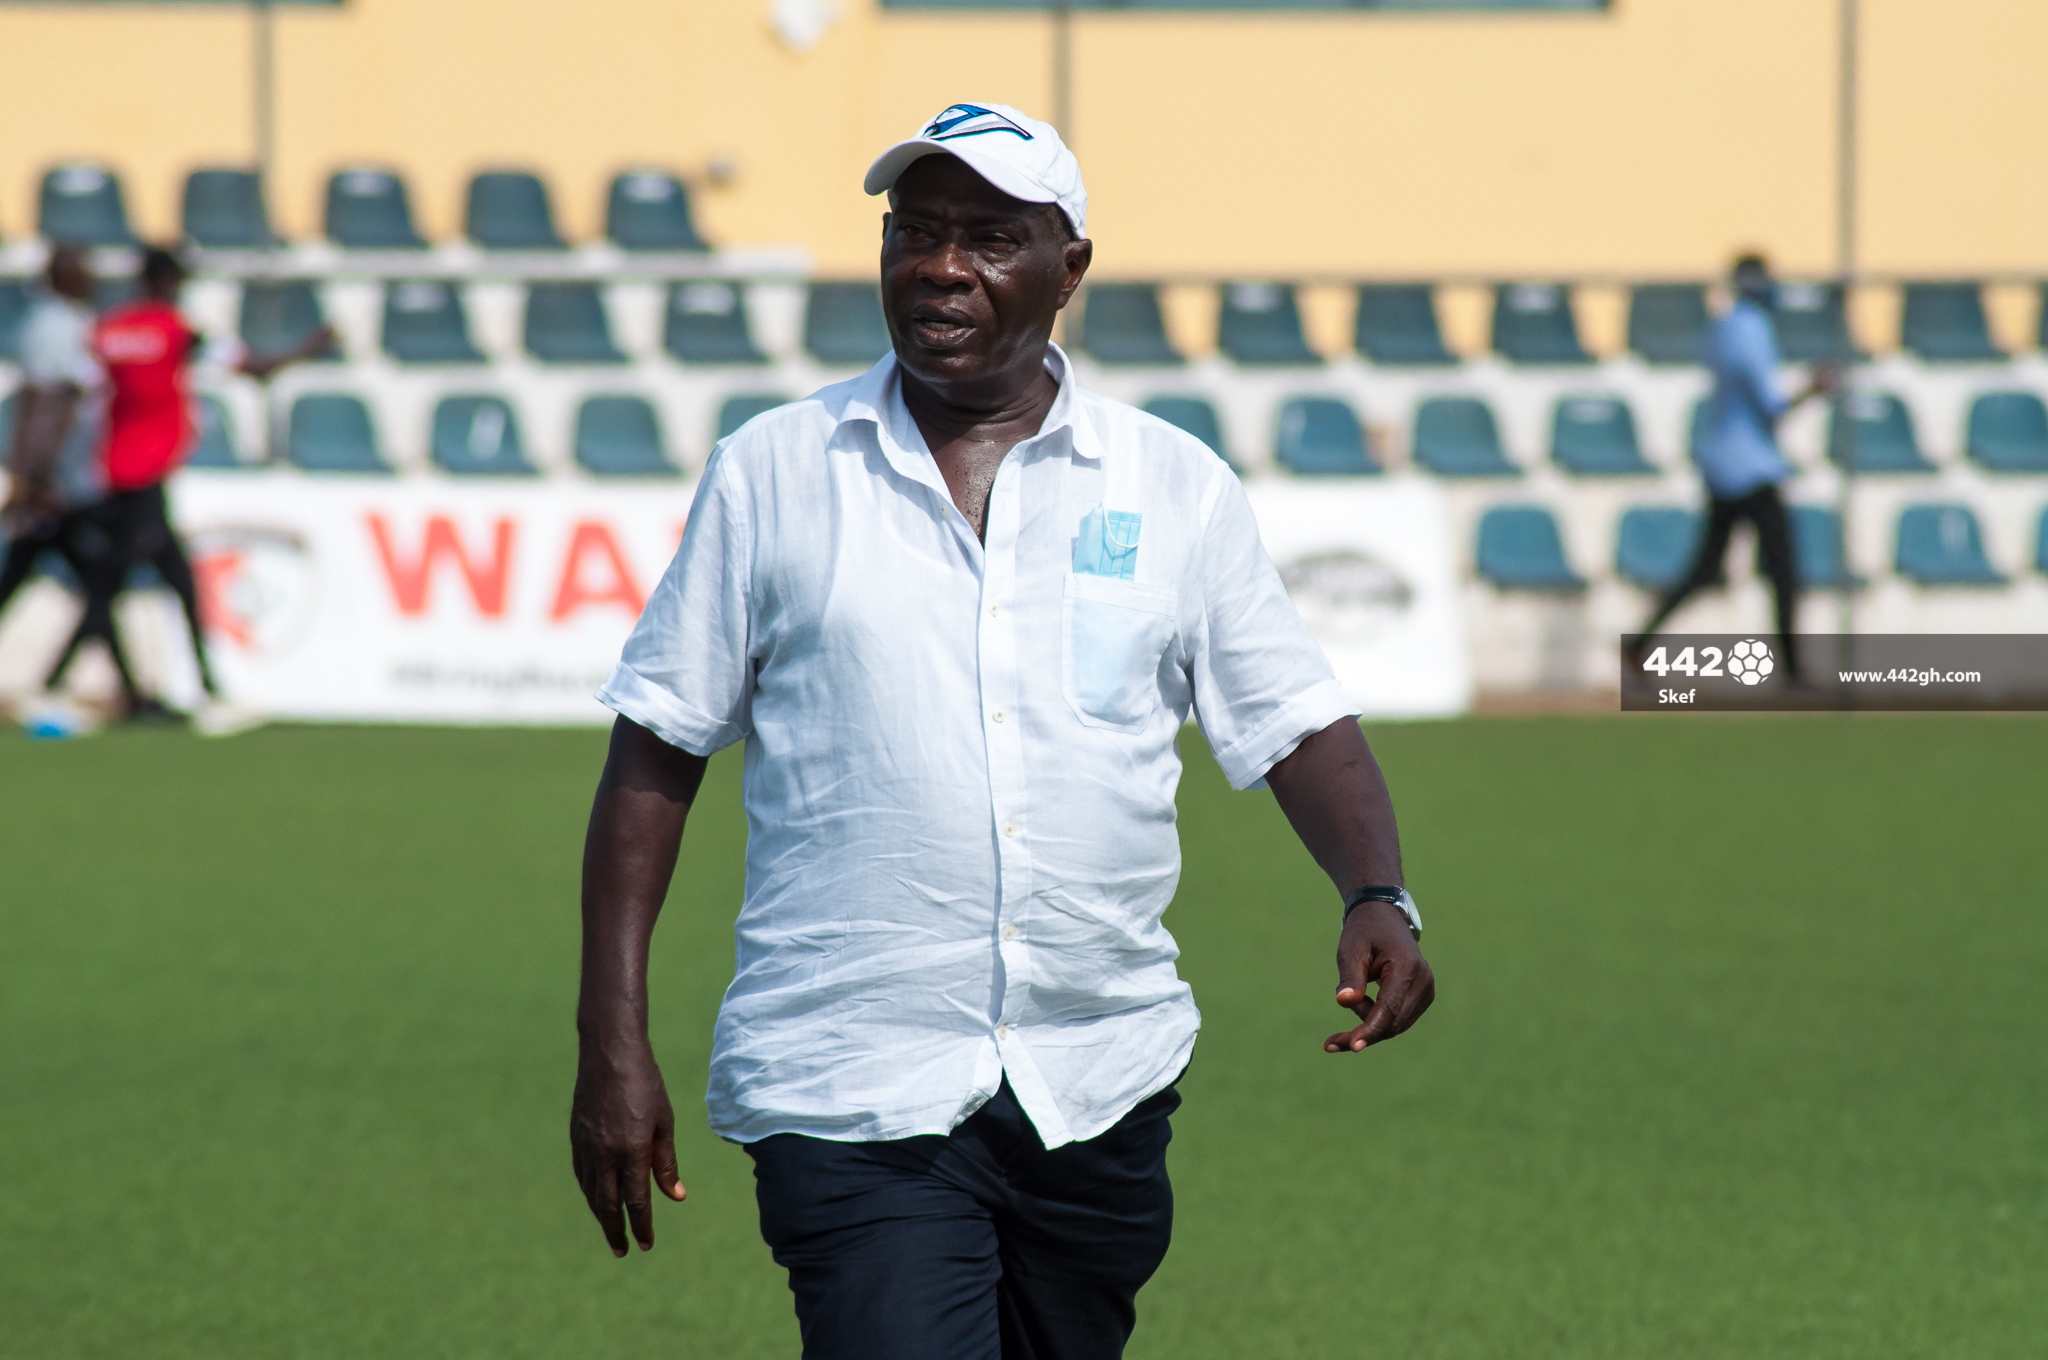 FC Samartex coaching job has been the most difficult in career - Annor Walker